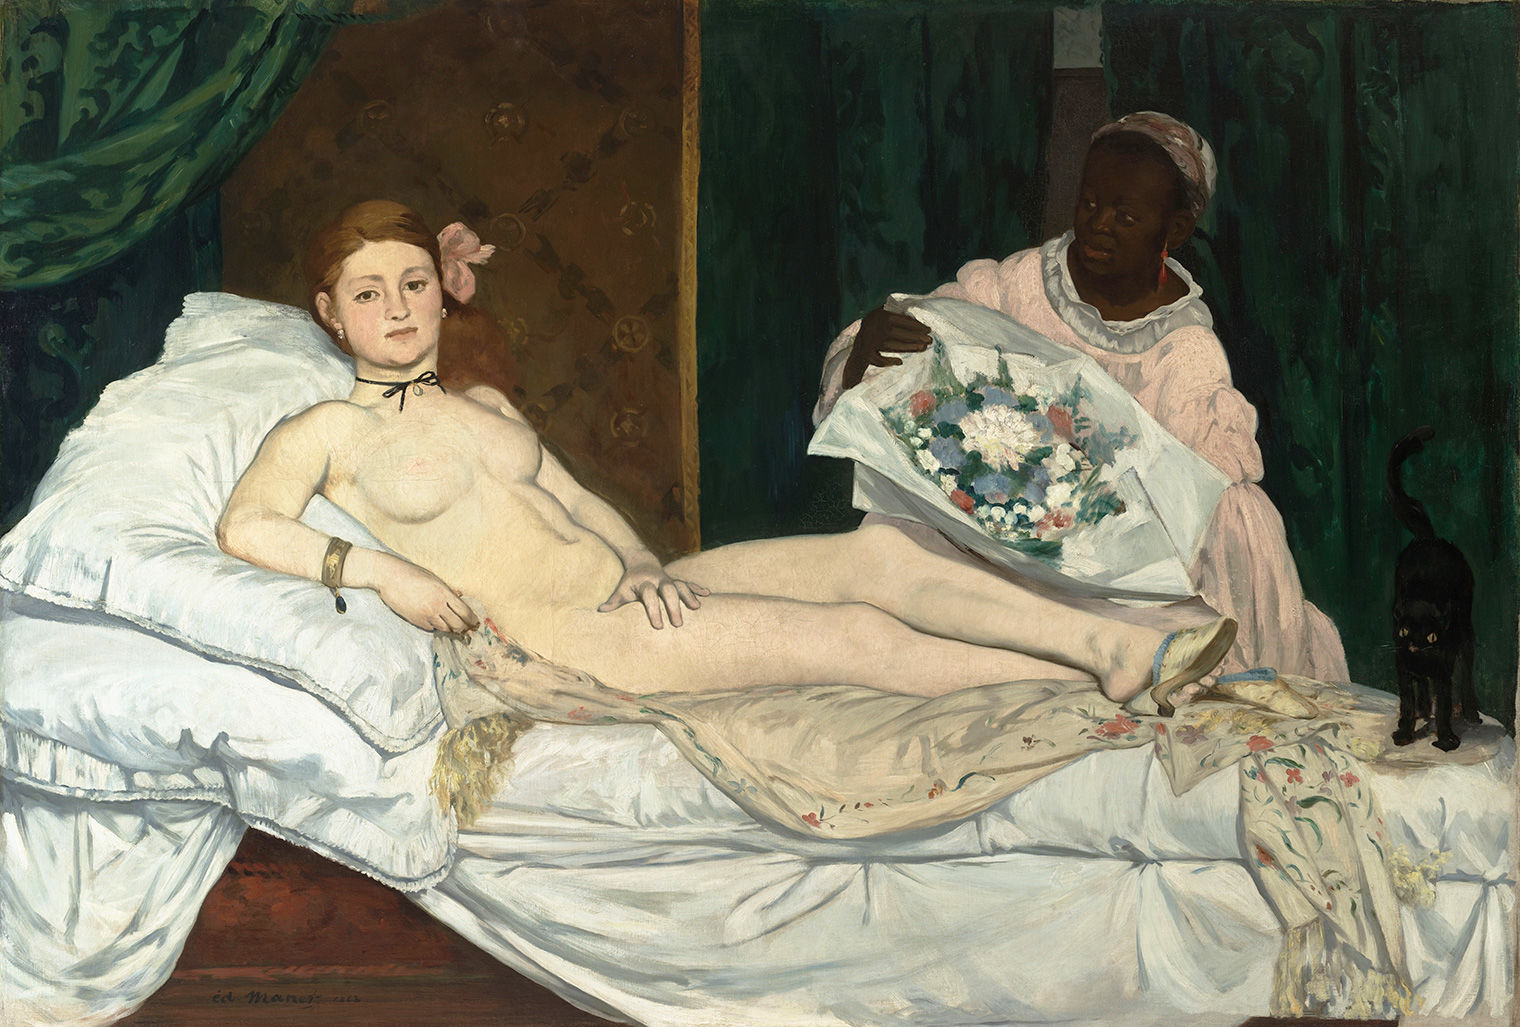 A nude woman reclines in bed and is attended to by a servant.